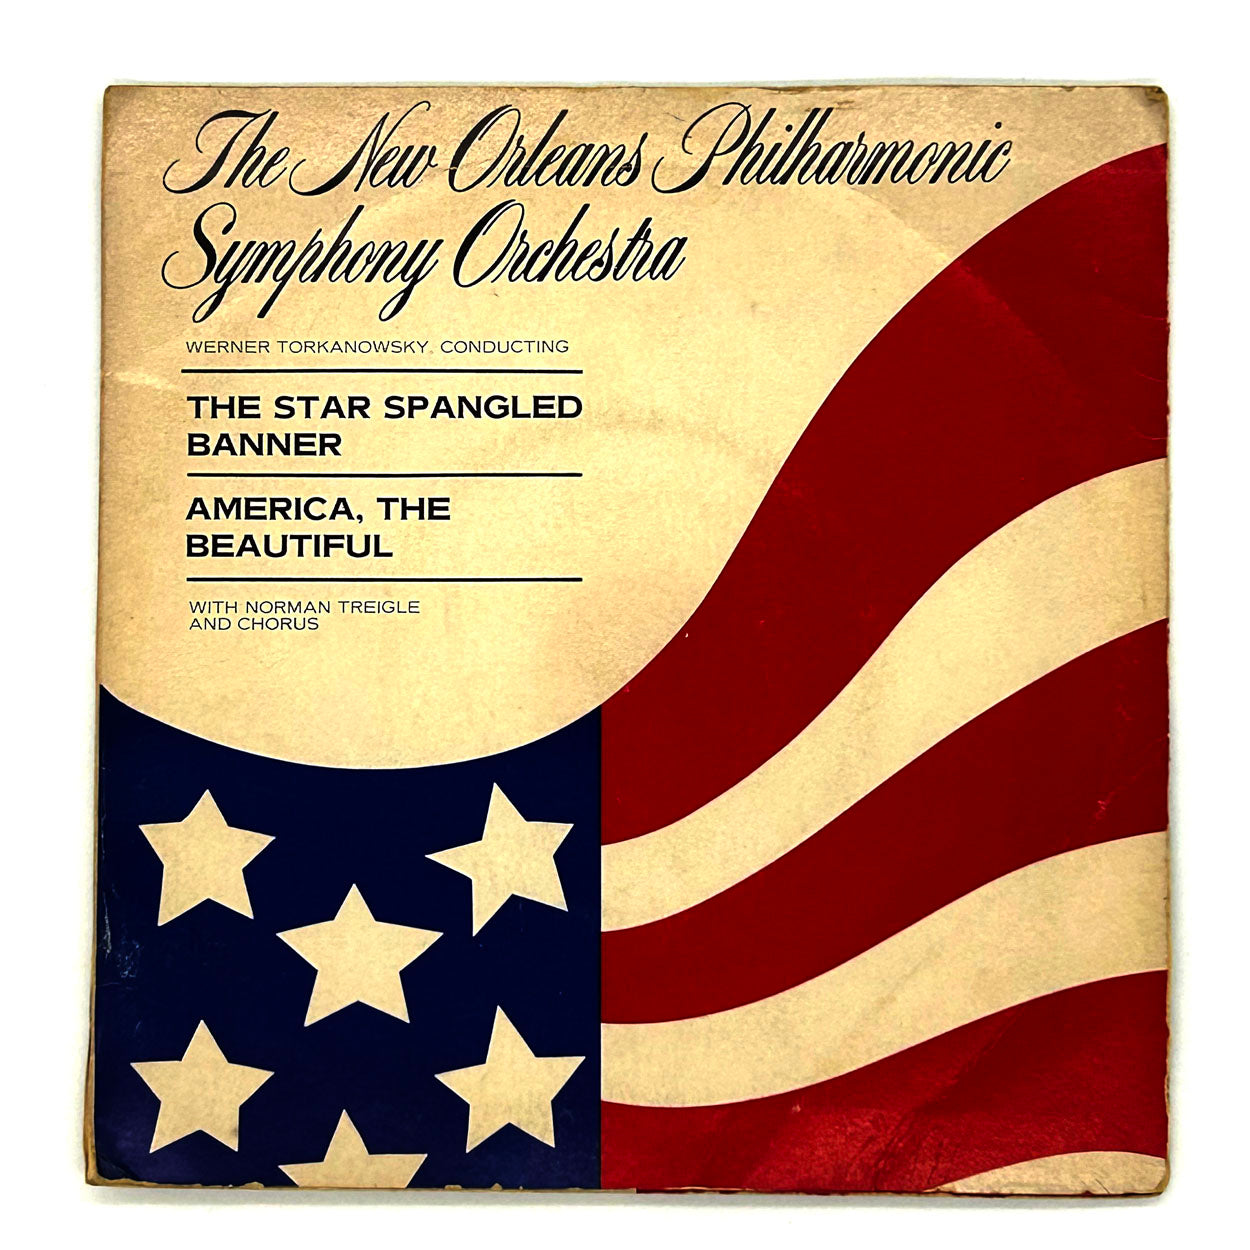 New Orleans Philharmonic Symphony Orchestra, The : THE STAR SPANGLED BANNER/ AMERICA, THE BEAUTIFUL